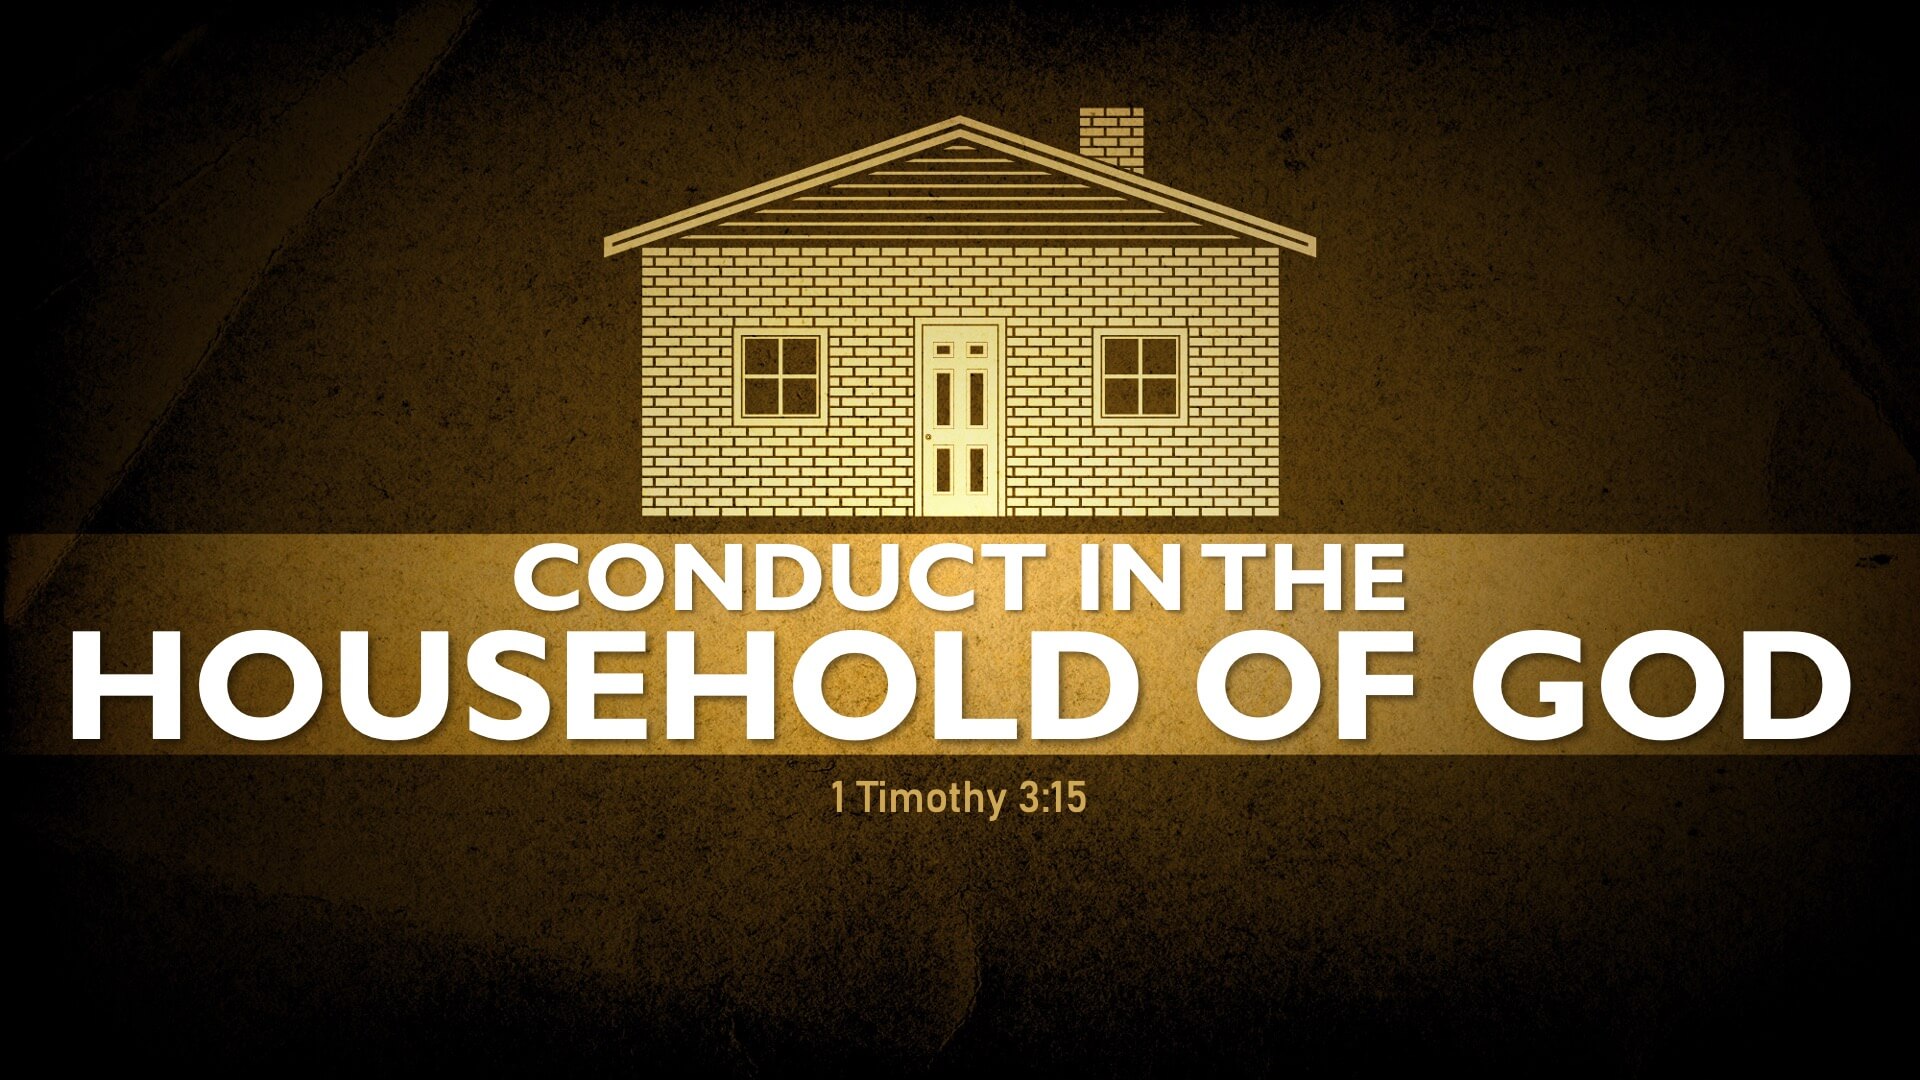 Conduct in the Household of God